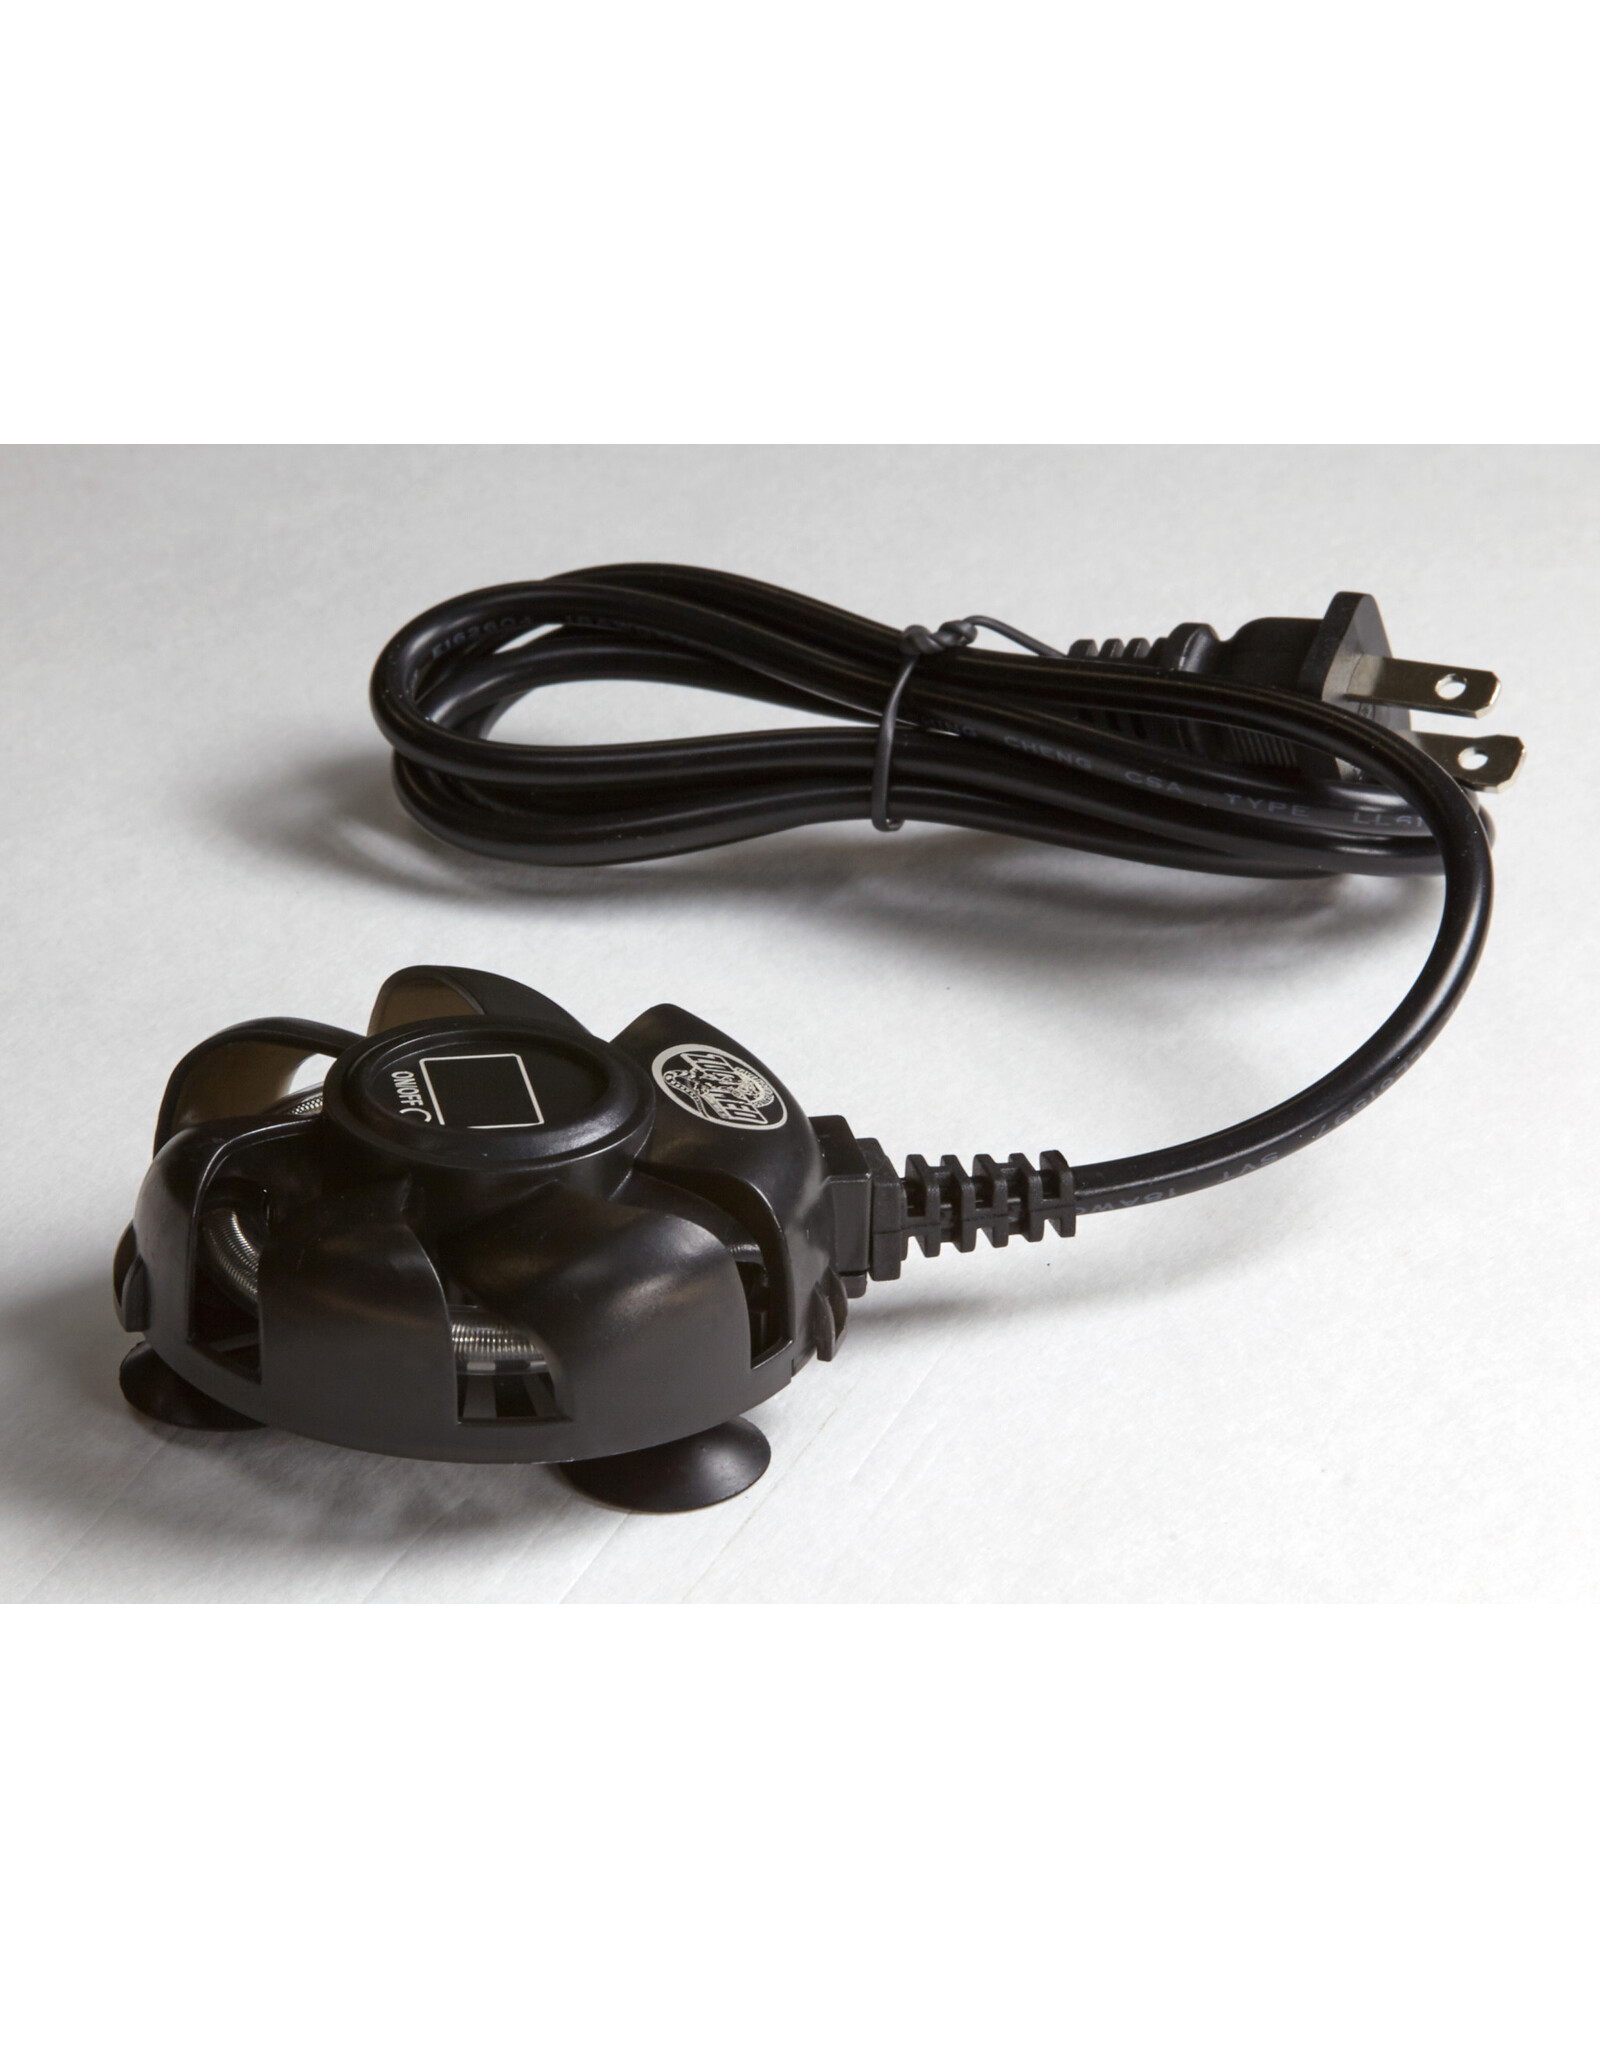 Zoo Med Zoo Med TurtleTherm Aquatic Turtle Heater 300W